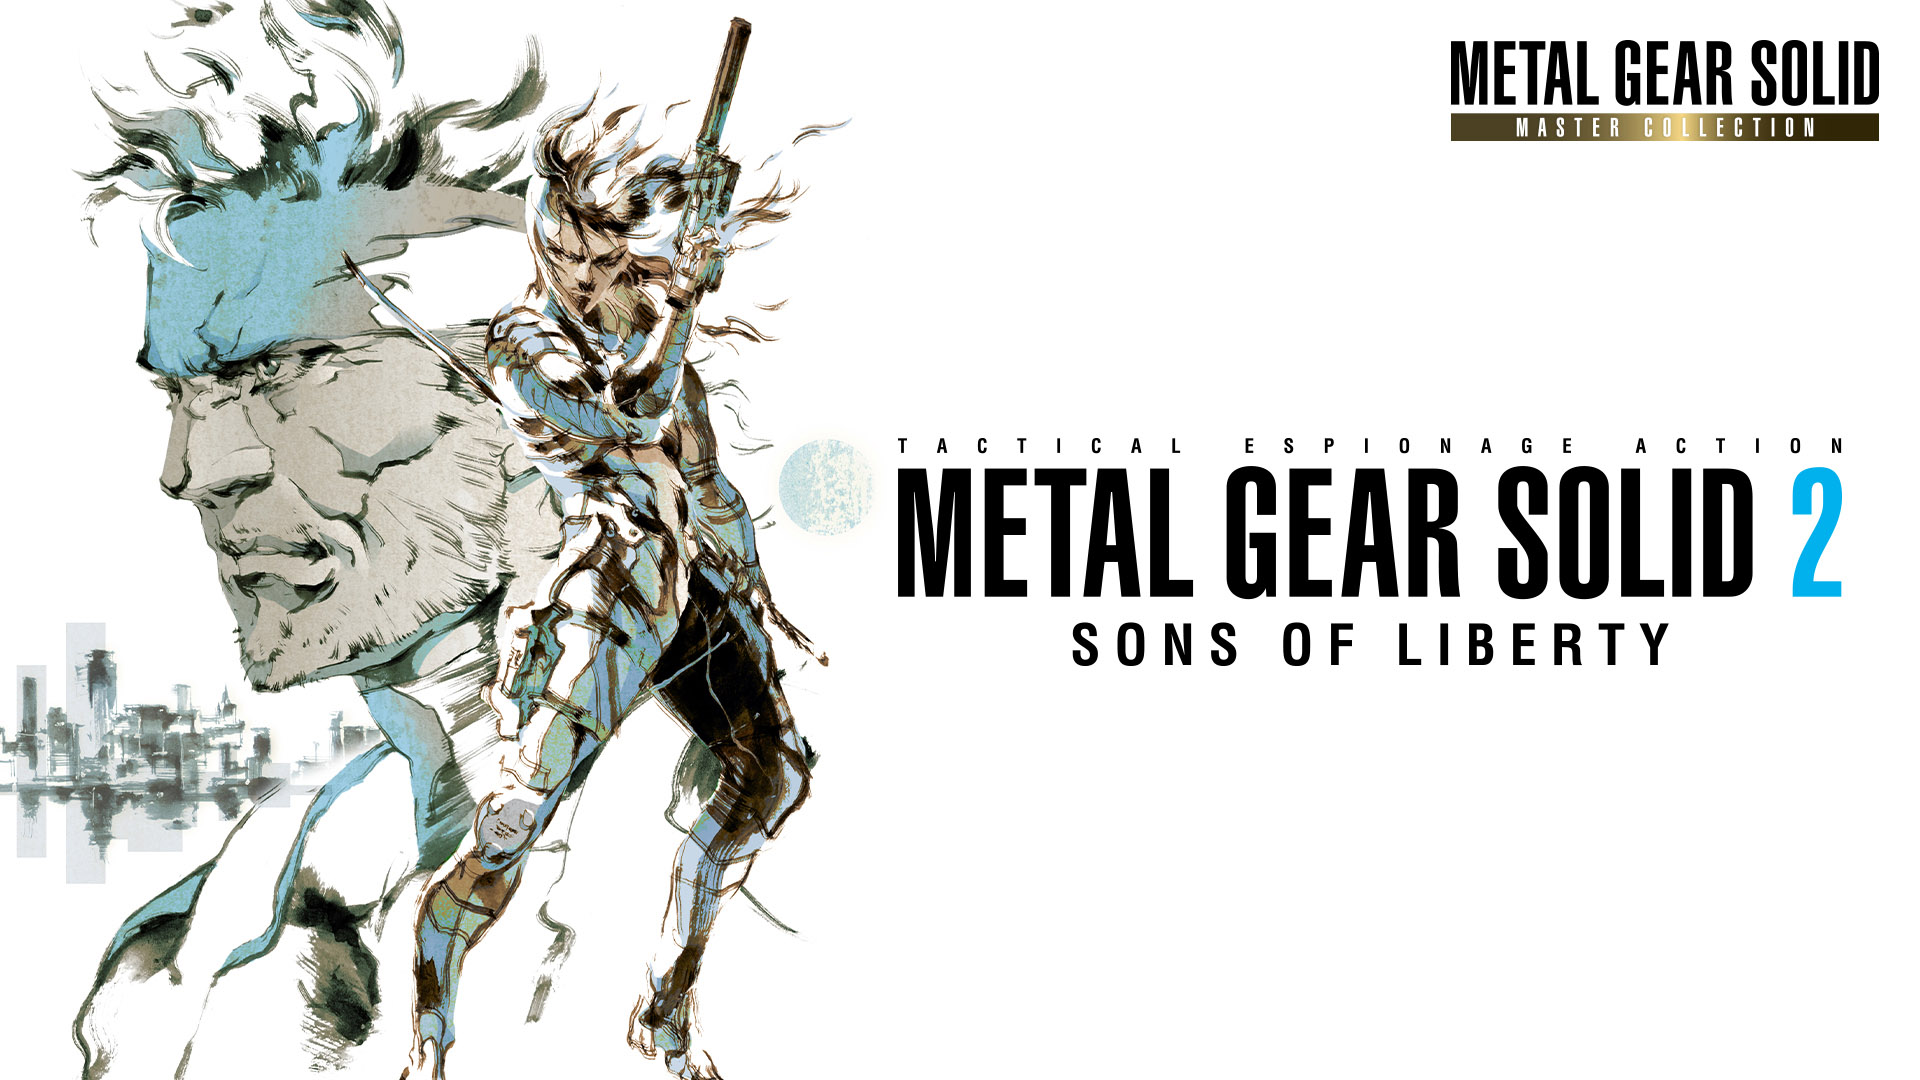 Metal Gear Solid: Master Collection Vol. 1 Switch physical download